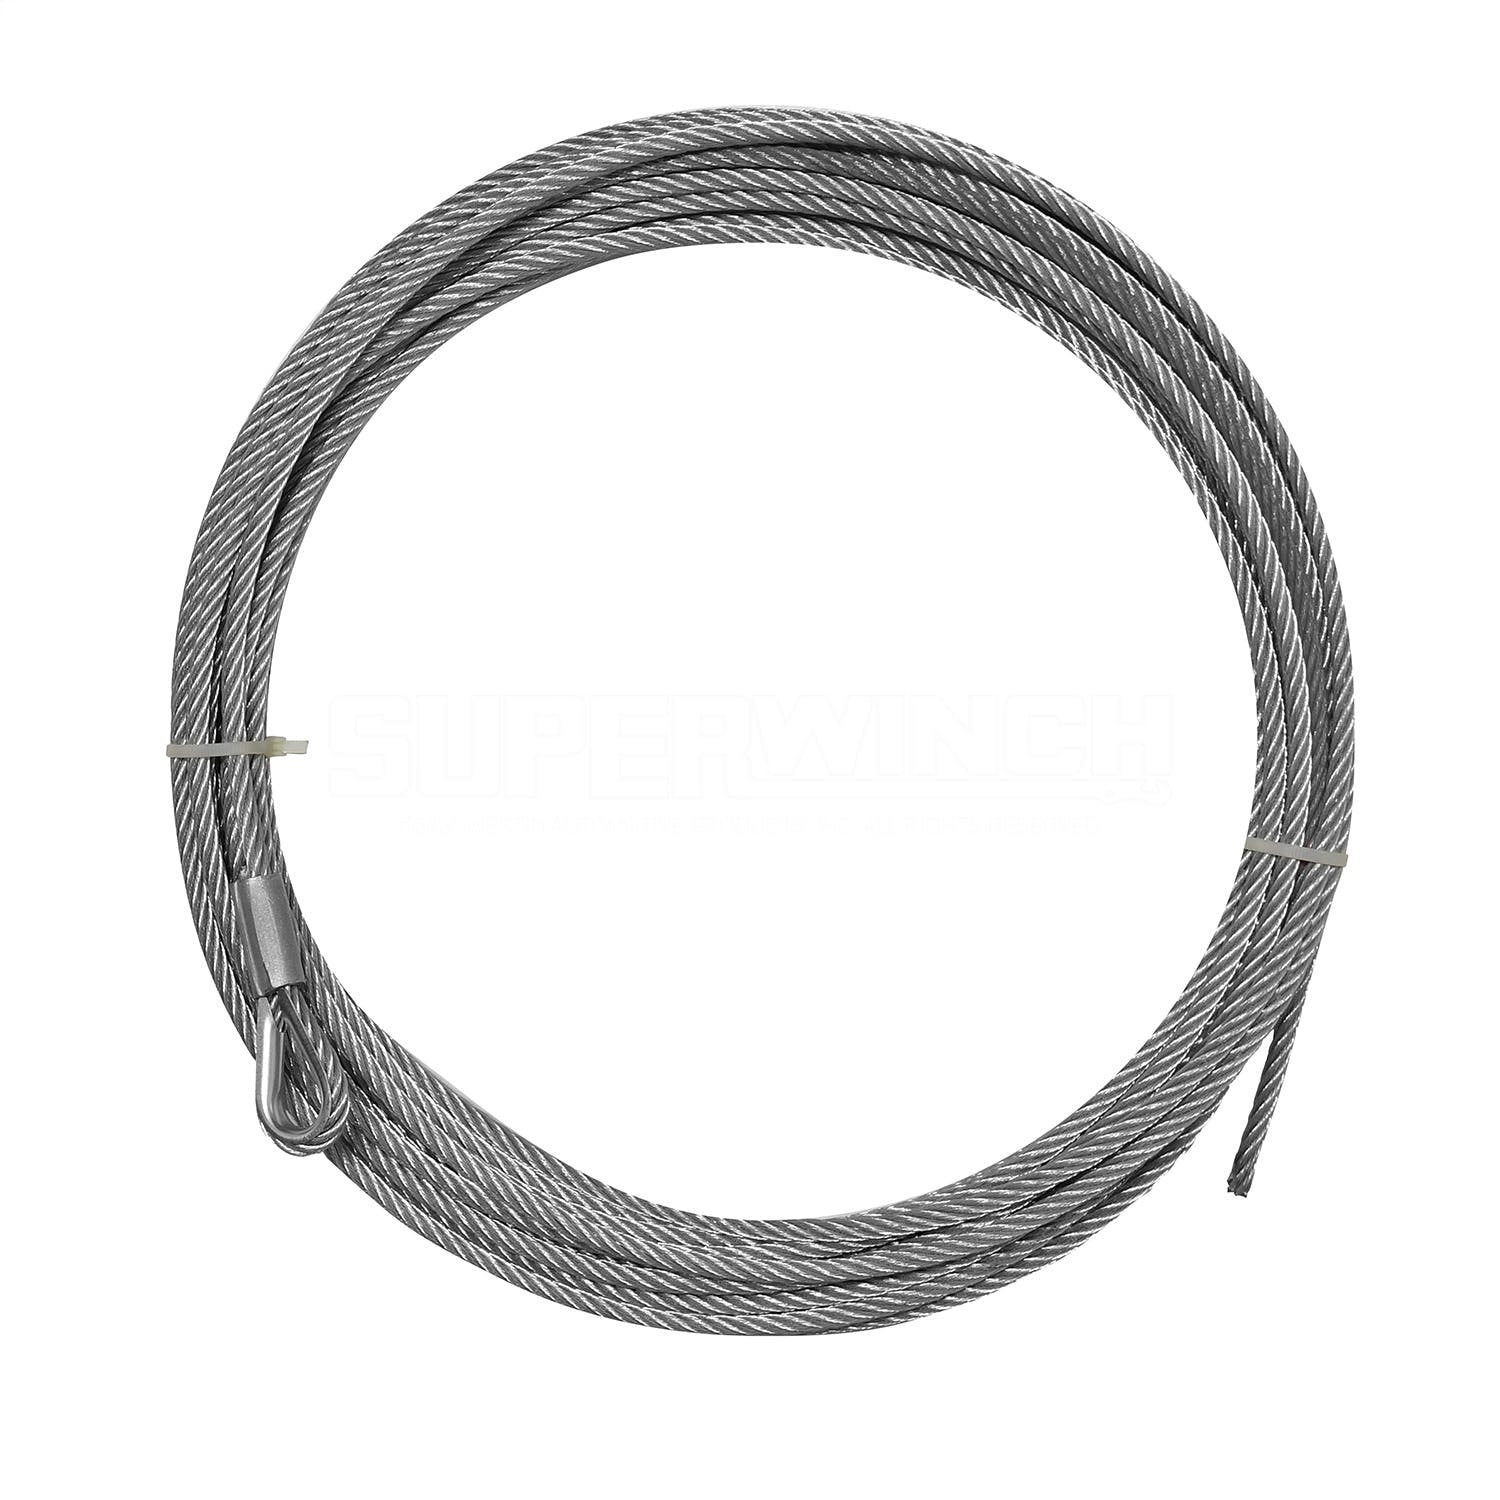 Superwinch 89-24640 Replacement Wire Rope 5/16 diameter x 55 length for S5500/S7500 Winches